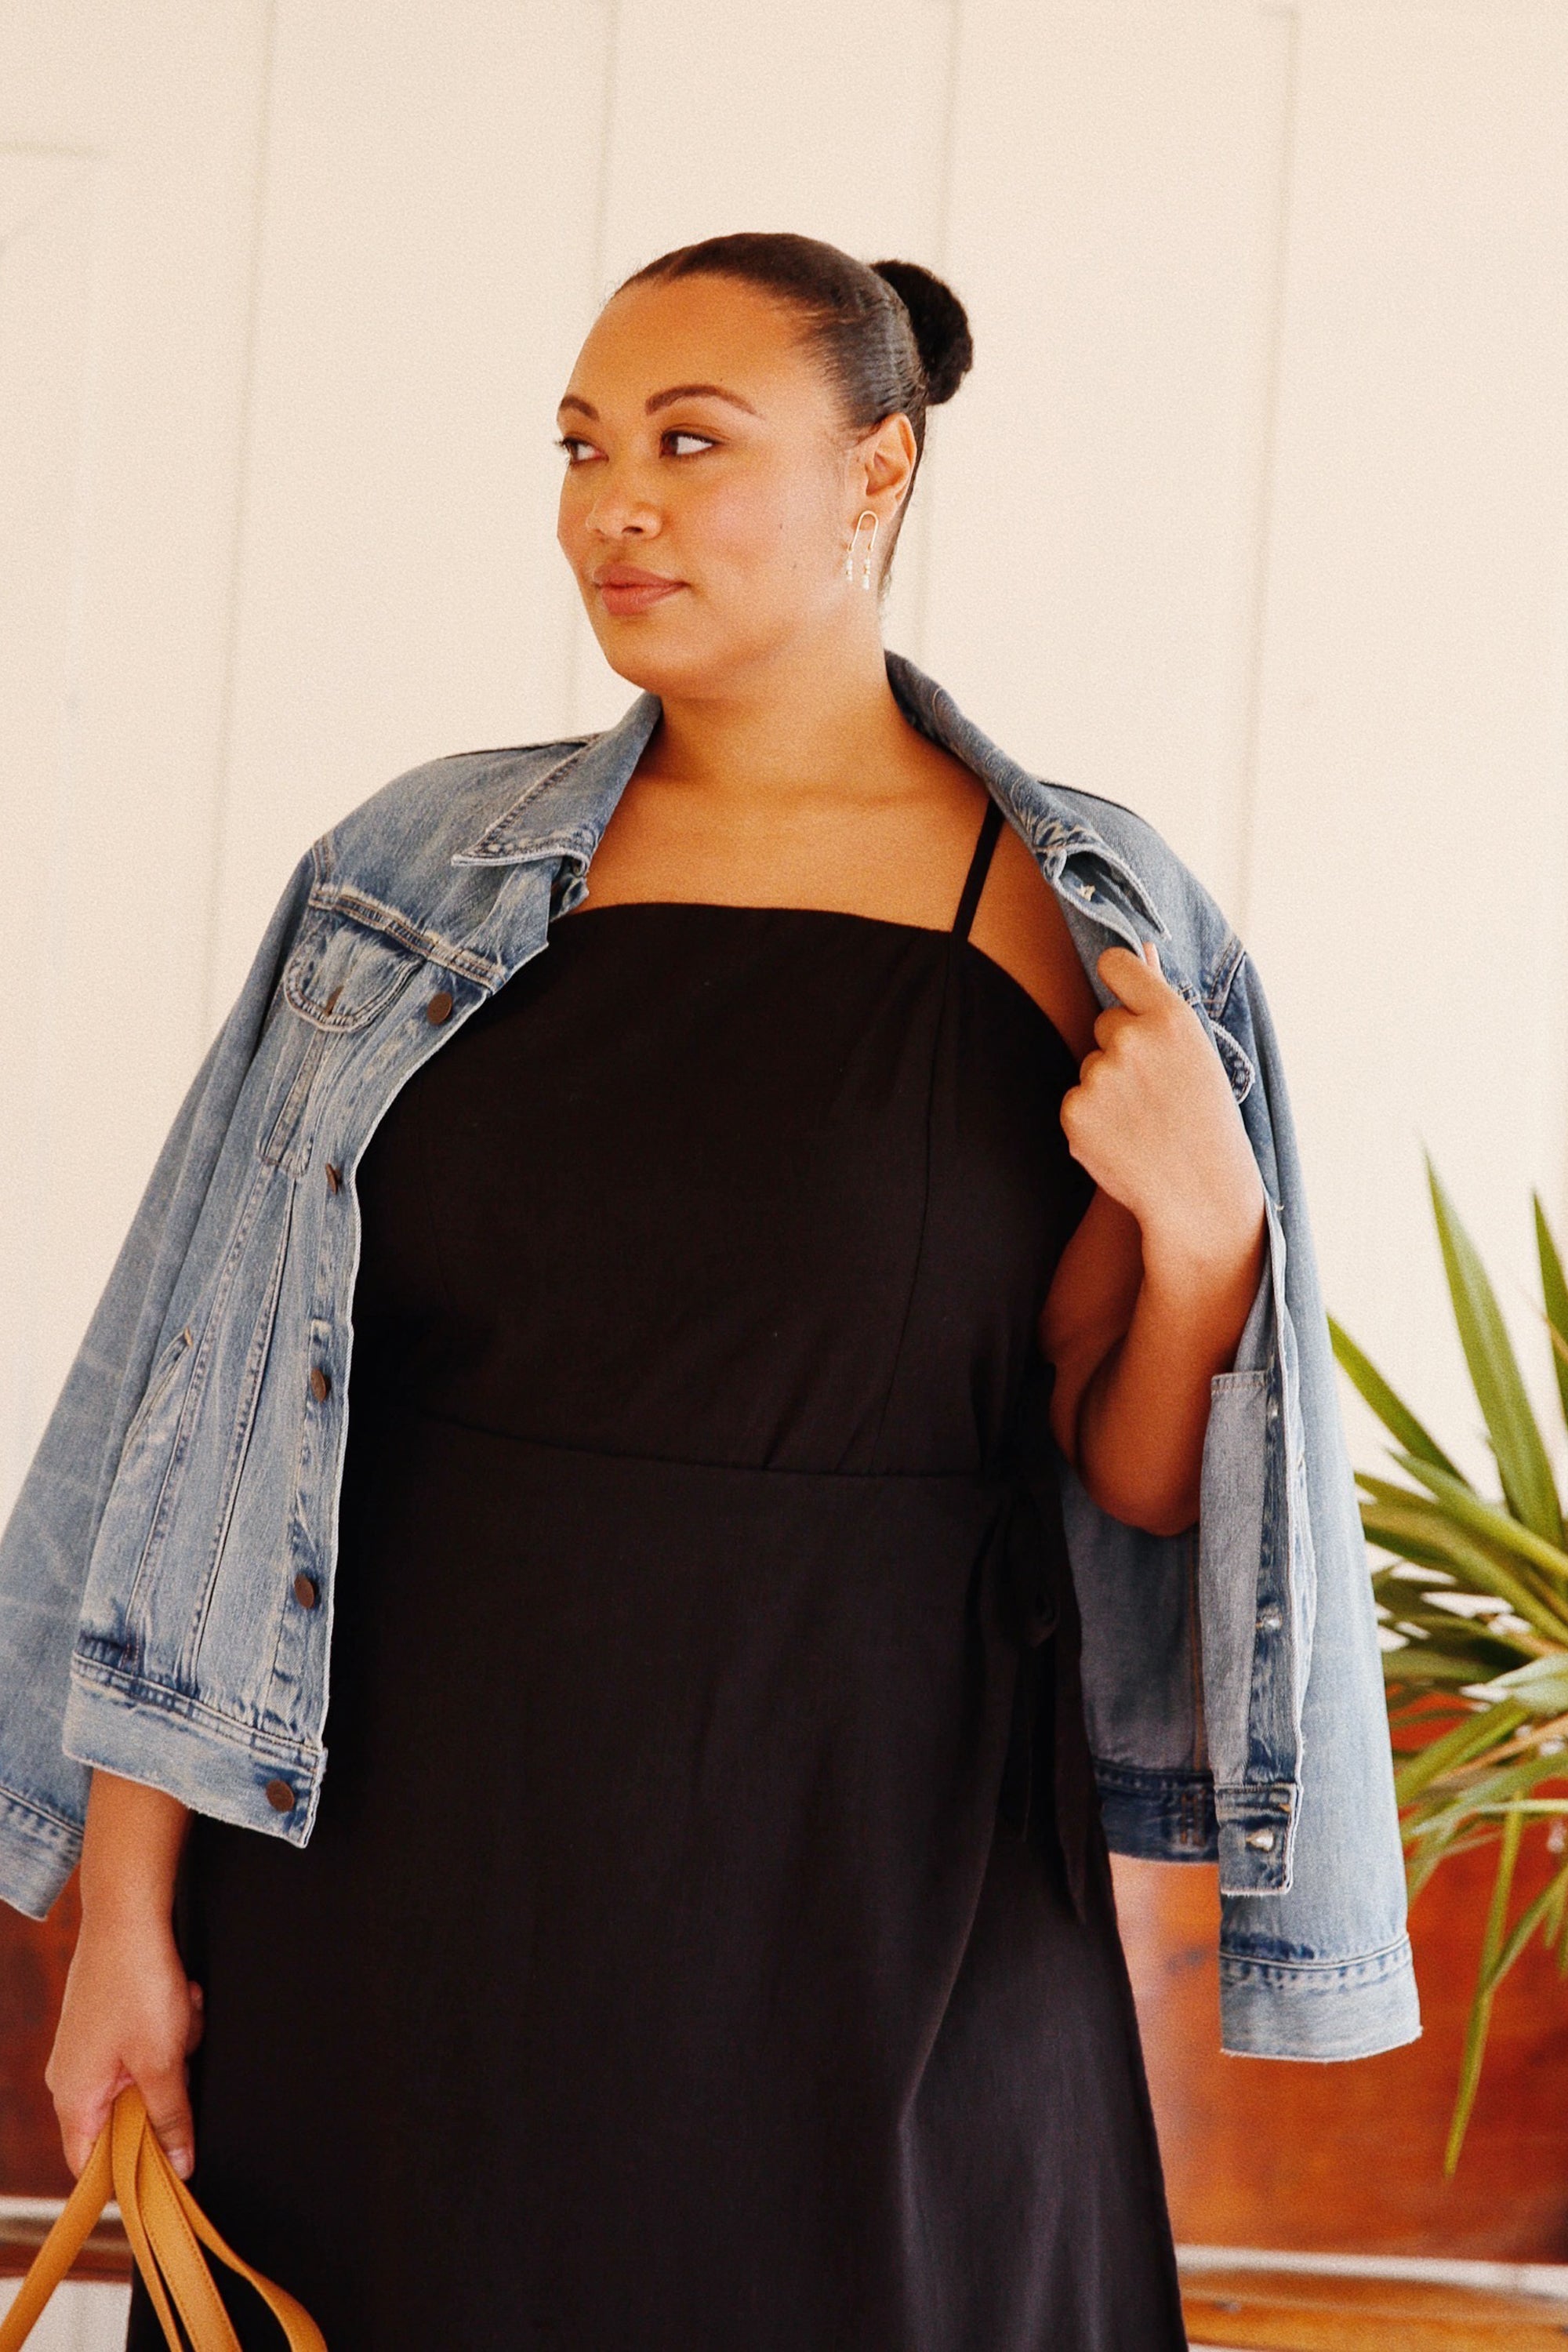 A woman in a black dress and denim jacket with a confident expression.